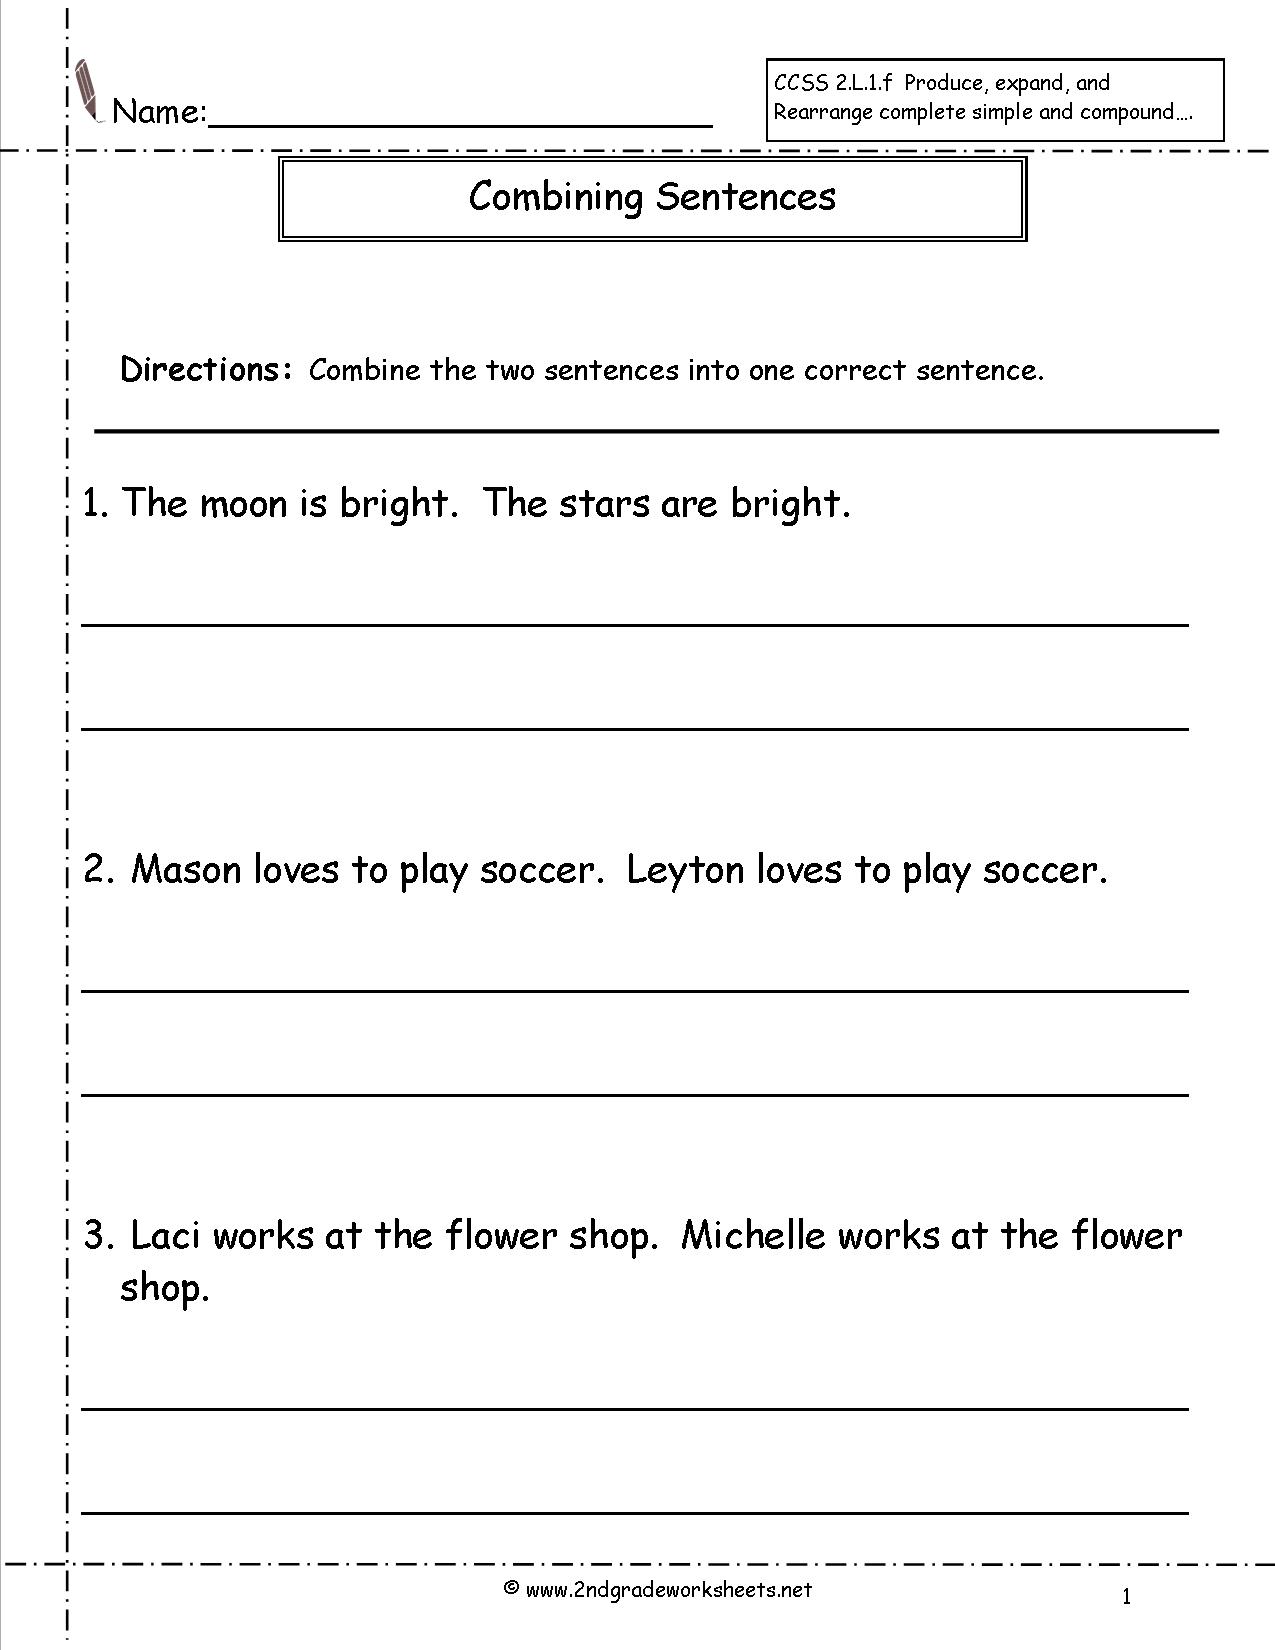 11 Images of Combining Sentences Worksheets